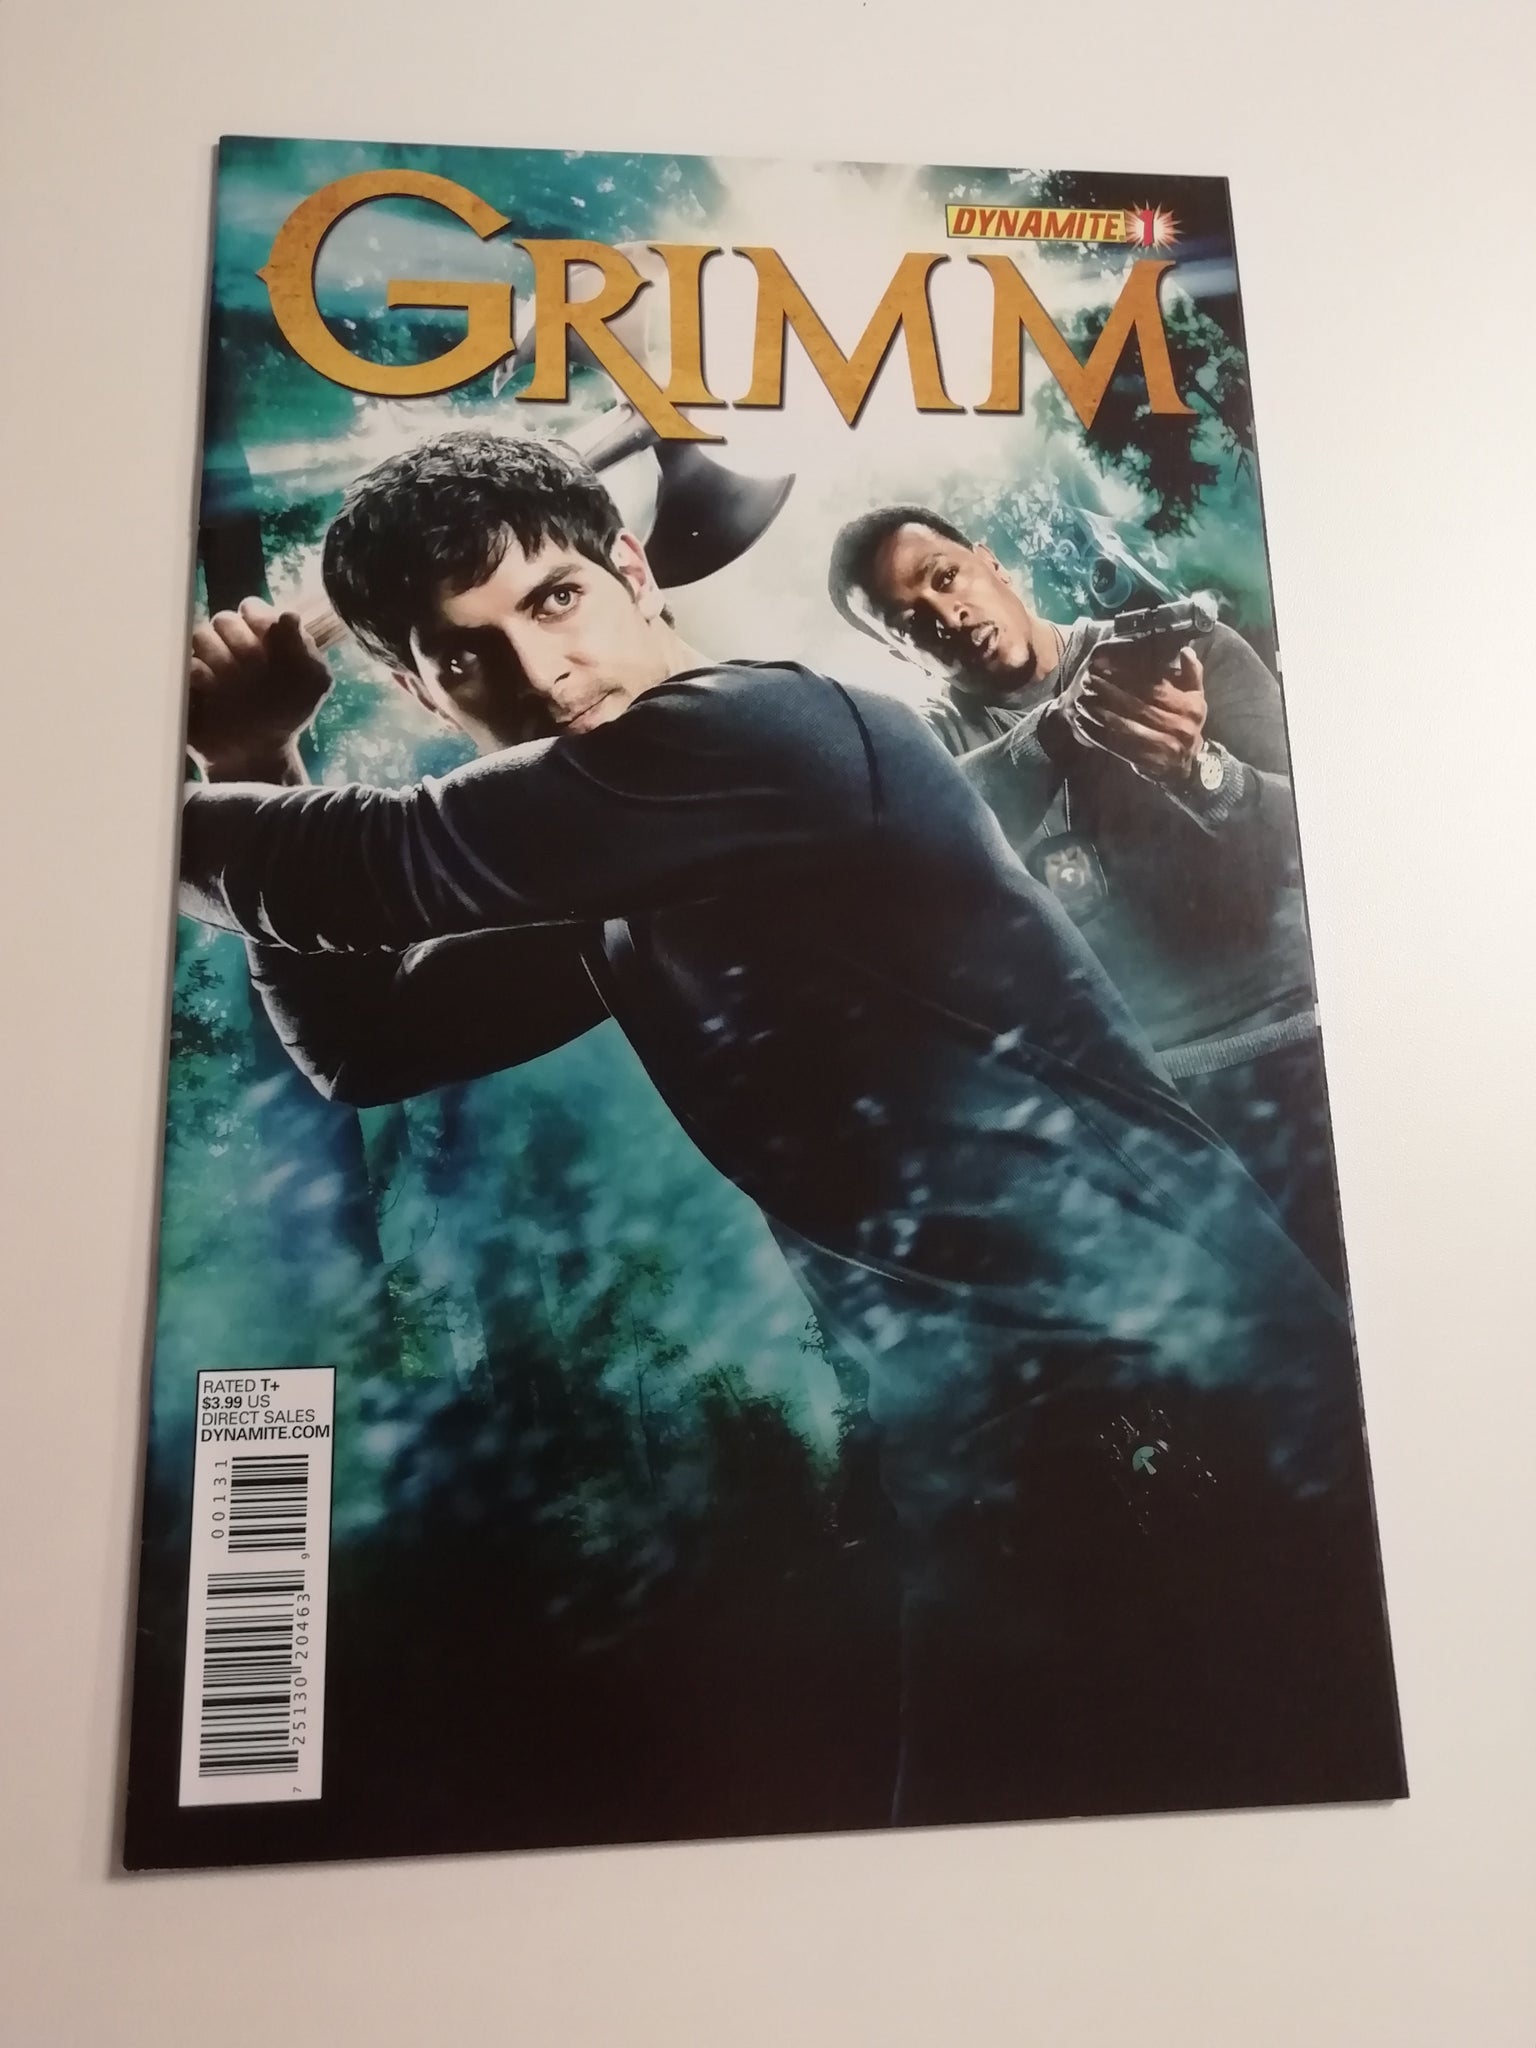 Grimm #1 VF/NM Photo Cover Variant